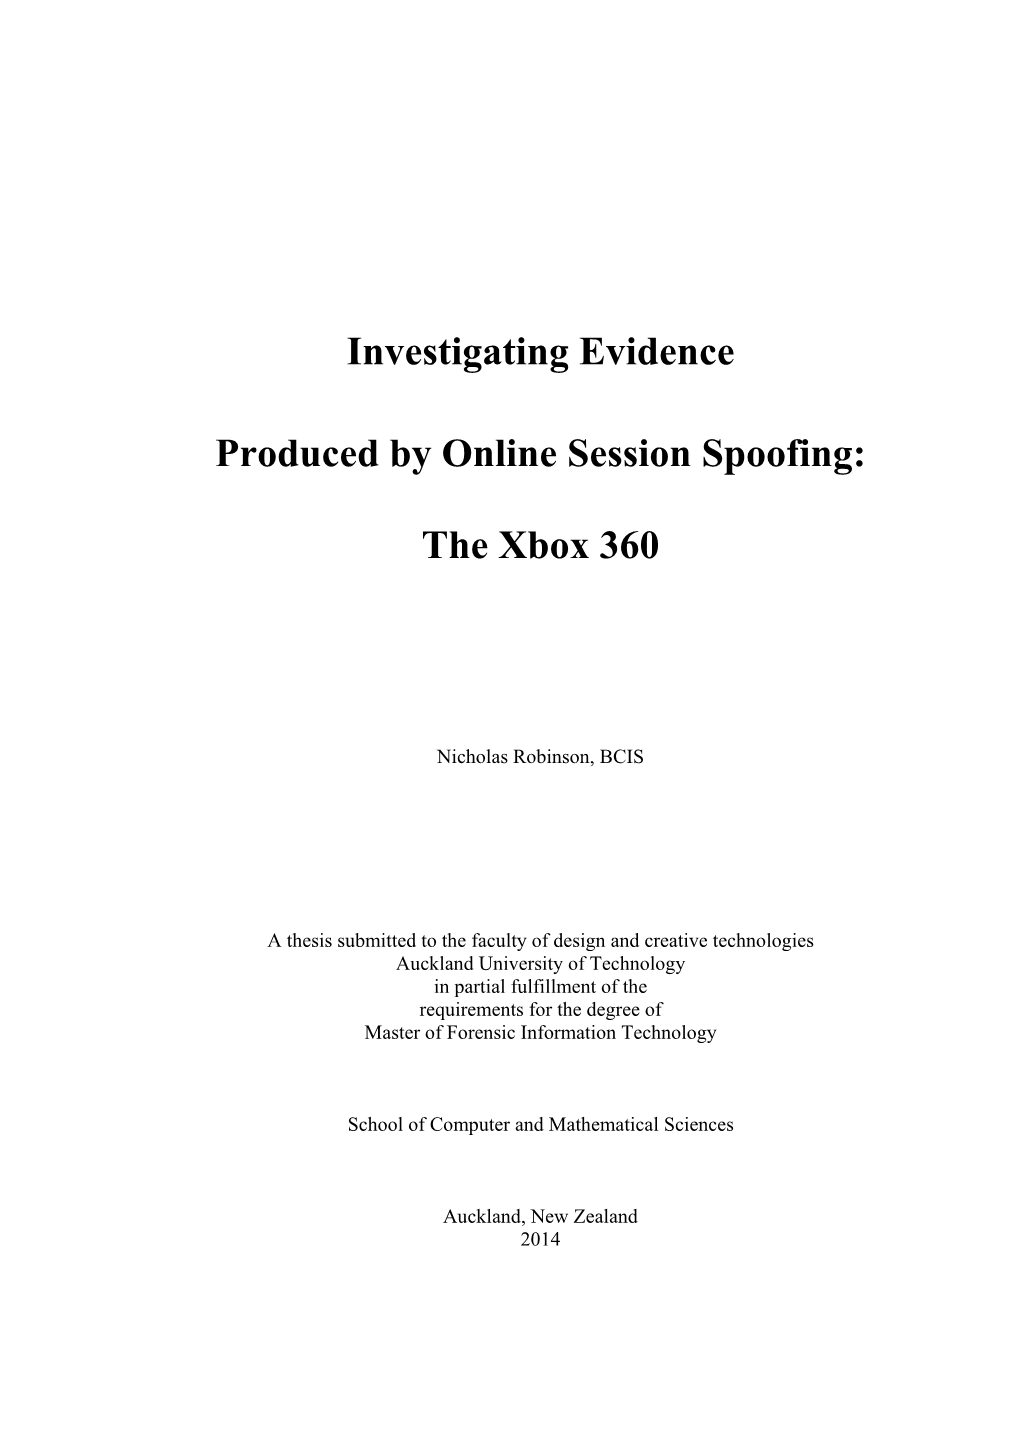 Investigating Evidence Produced by Online Session Spoofing: the Xbox